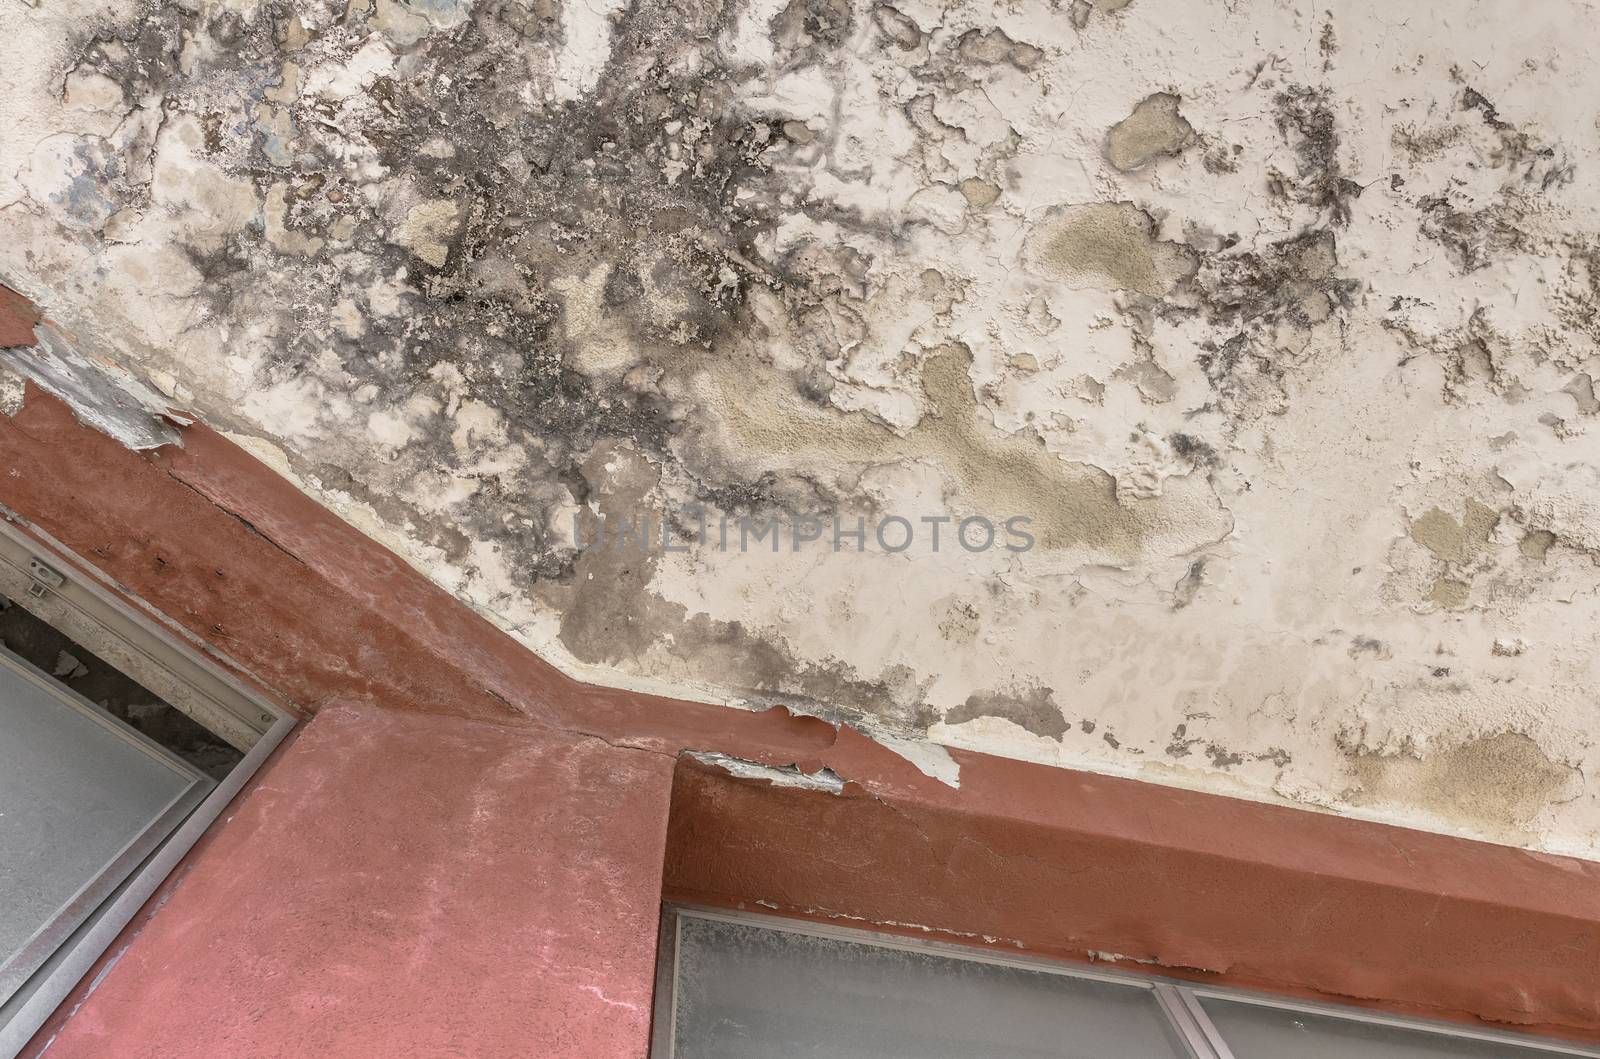 Black Mold growth and stains on the ceiling of an abandoned hotel or house.